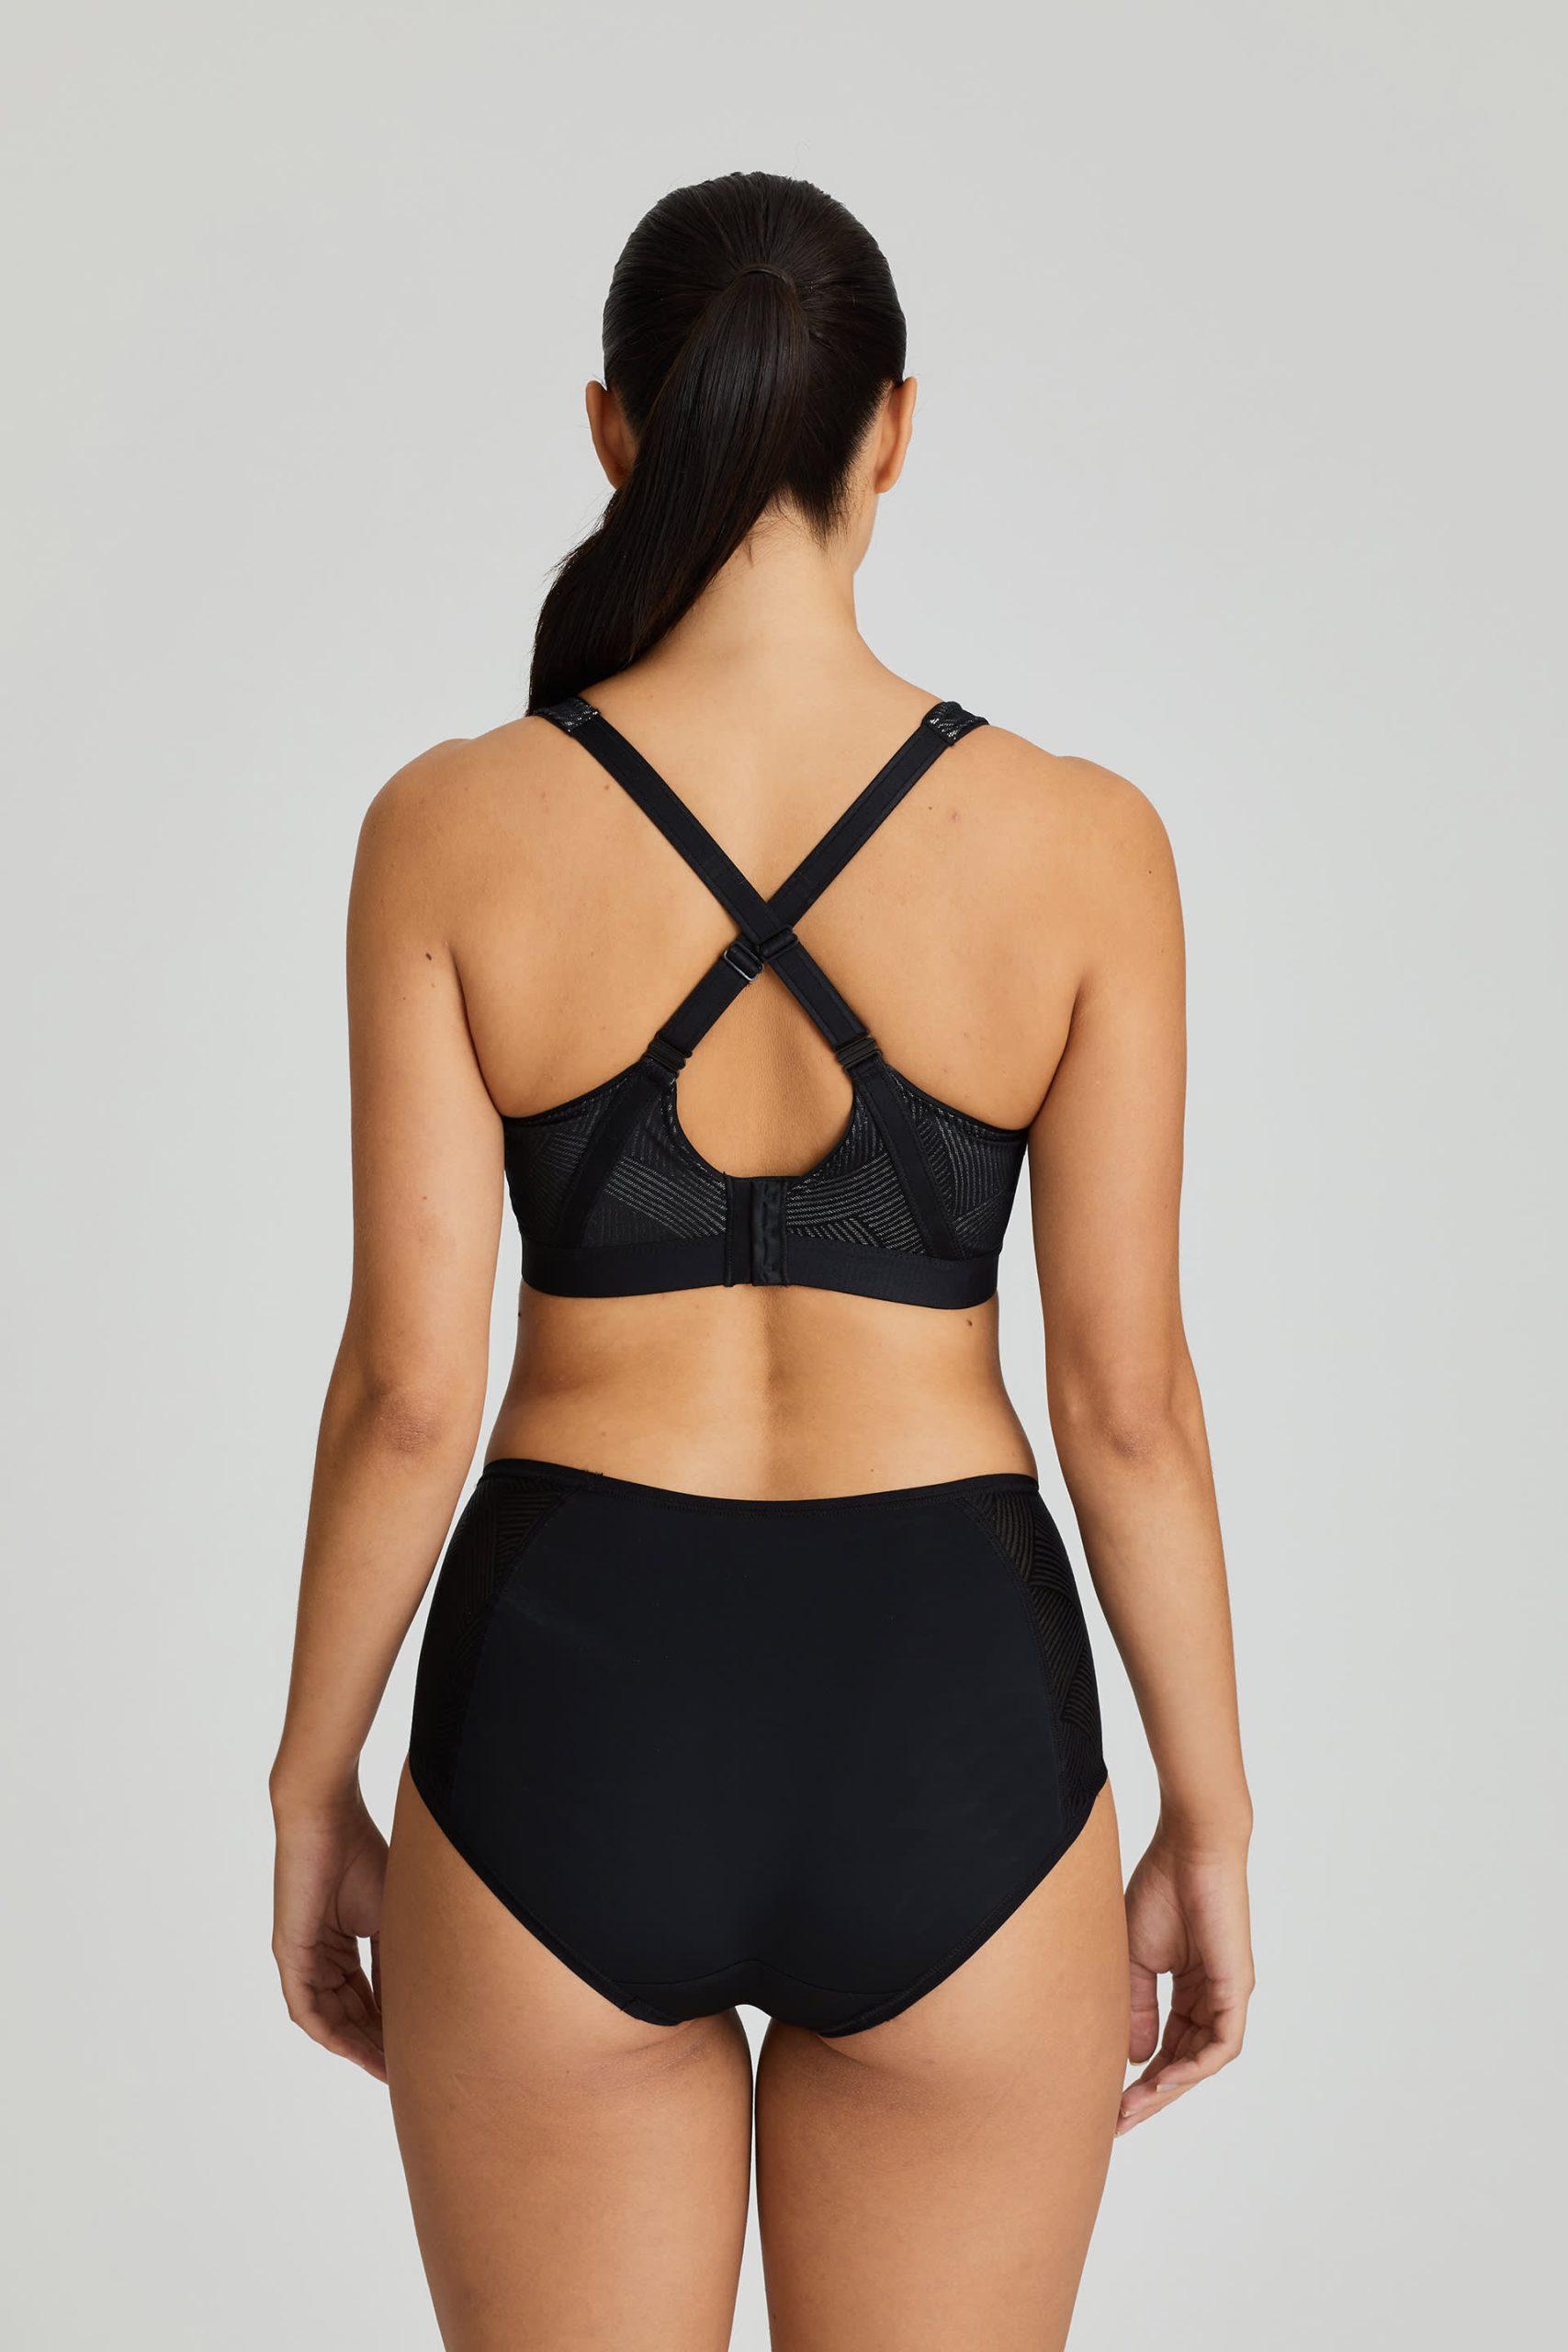 Prima Donna The Sweater Wired Sports Bra: Cosmic Grey - Chantilly